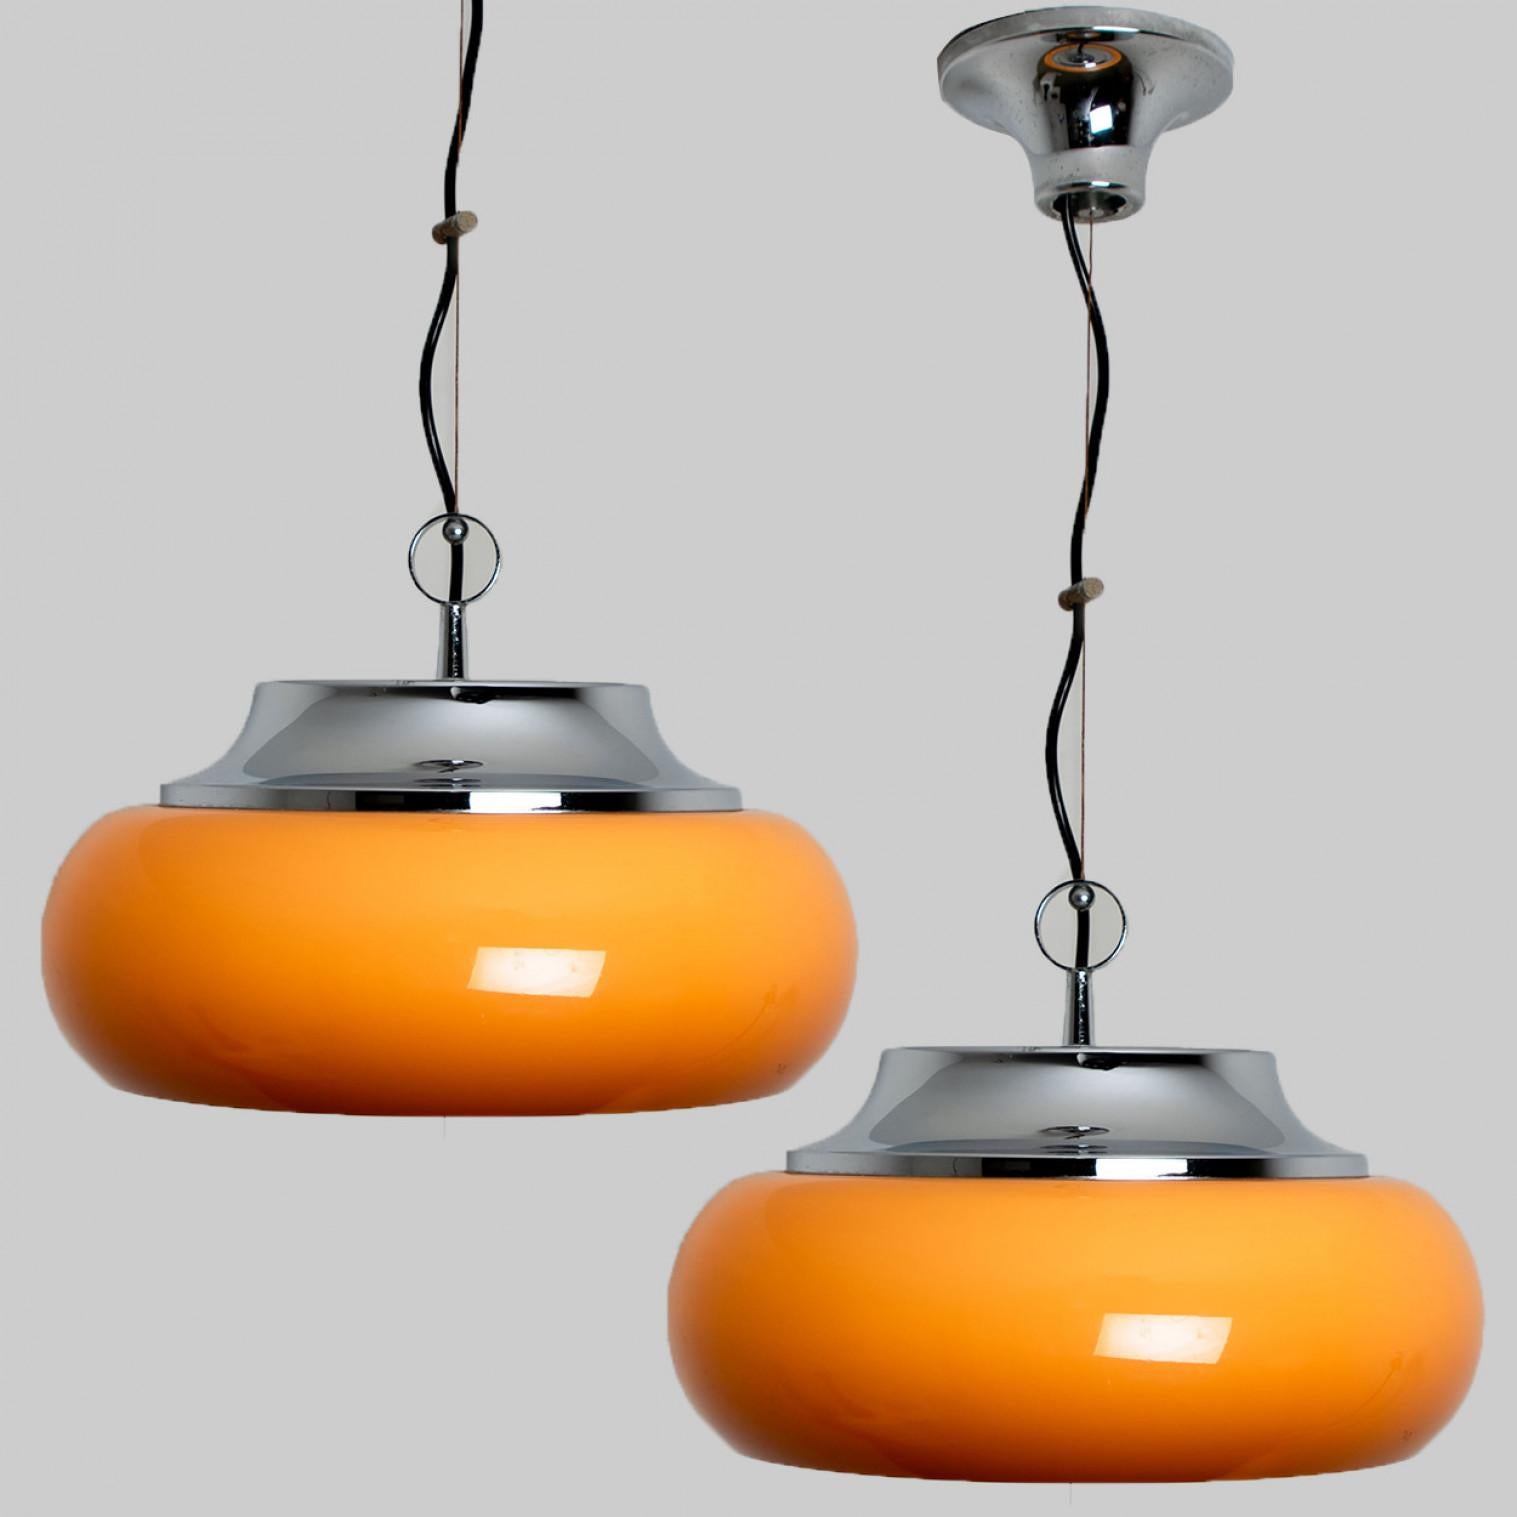 Pair of  beautiful Guzzini pendant lamps made by Meblo Yugoslavia in the 1970s.
A very fun pendant light, in space age  and retro style, because of the use of chrome and brown orange plexi glass.
Because of the orange plexi glass, it's a feast for